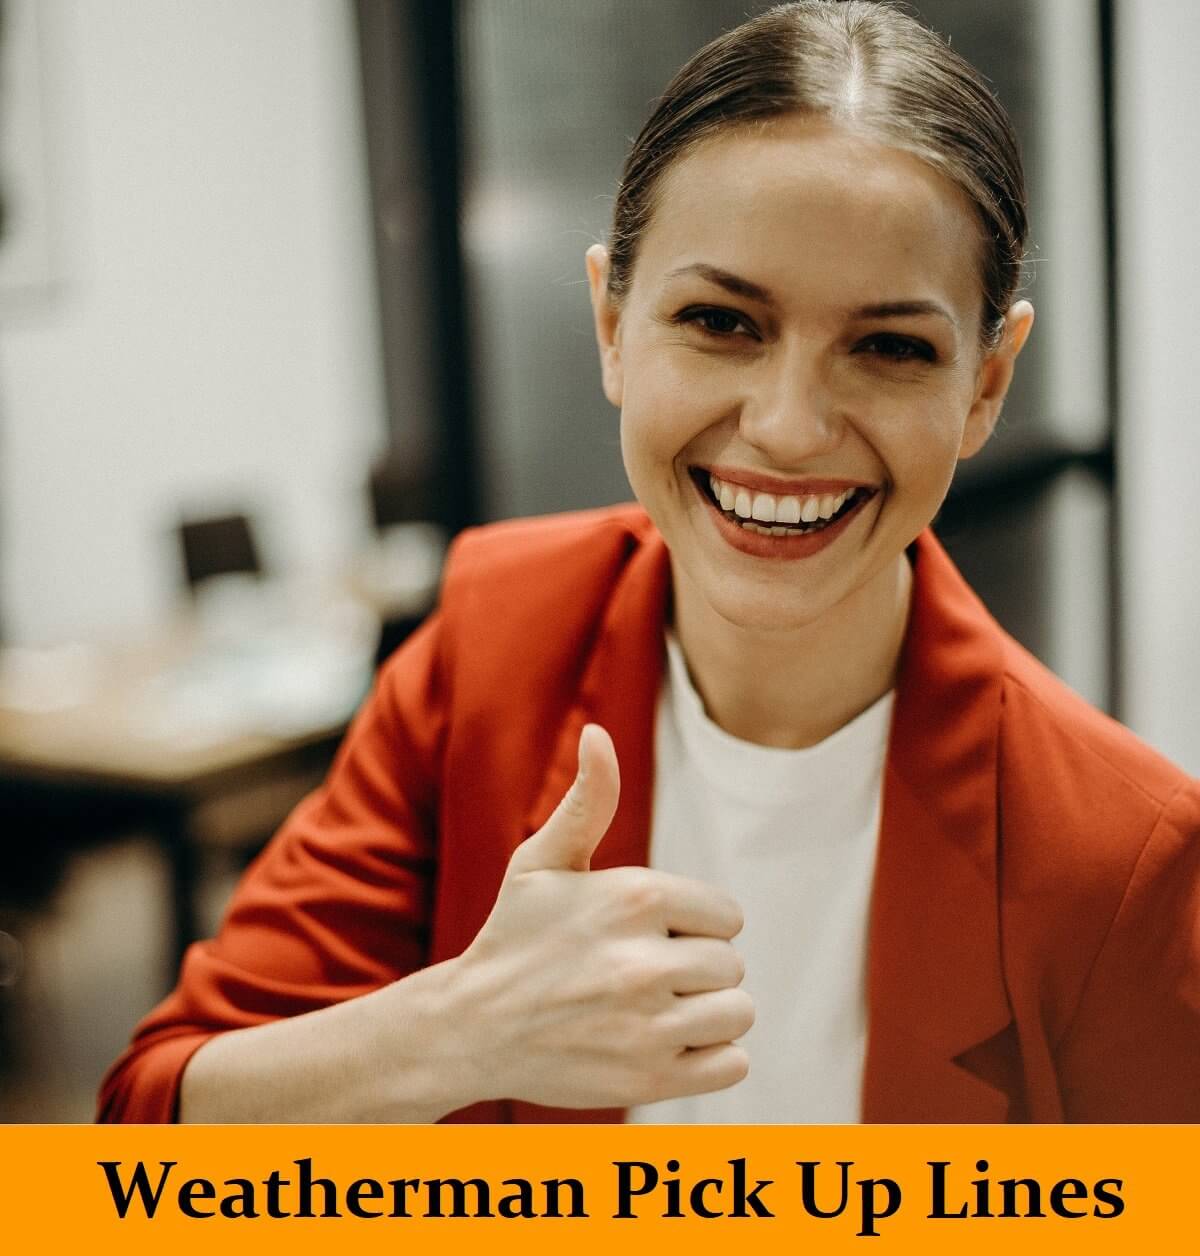 Pick Up LInes for Weatherwoman